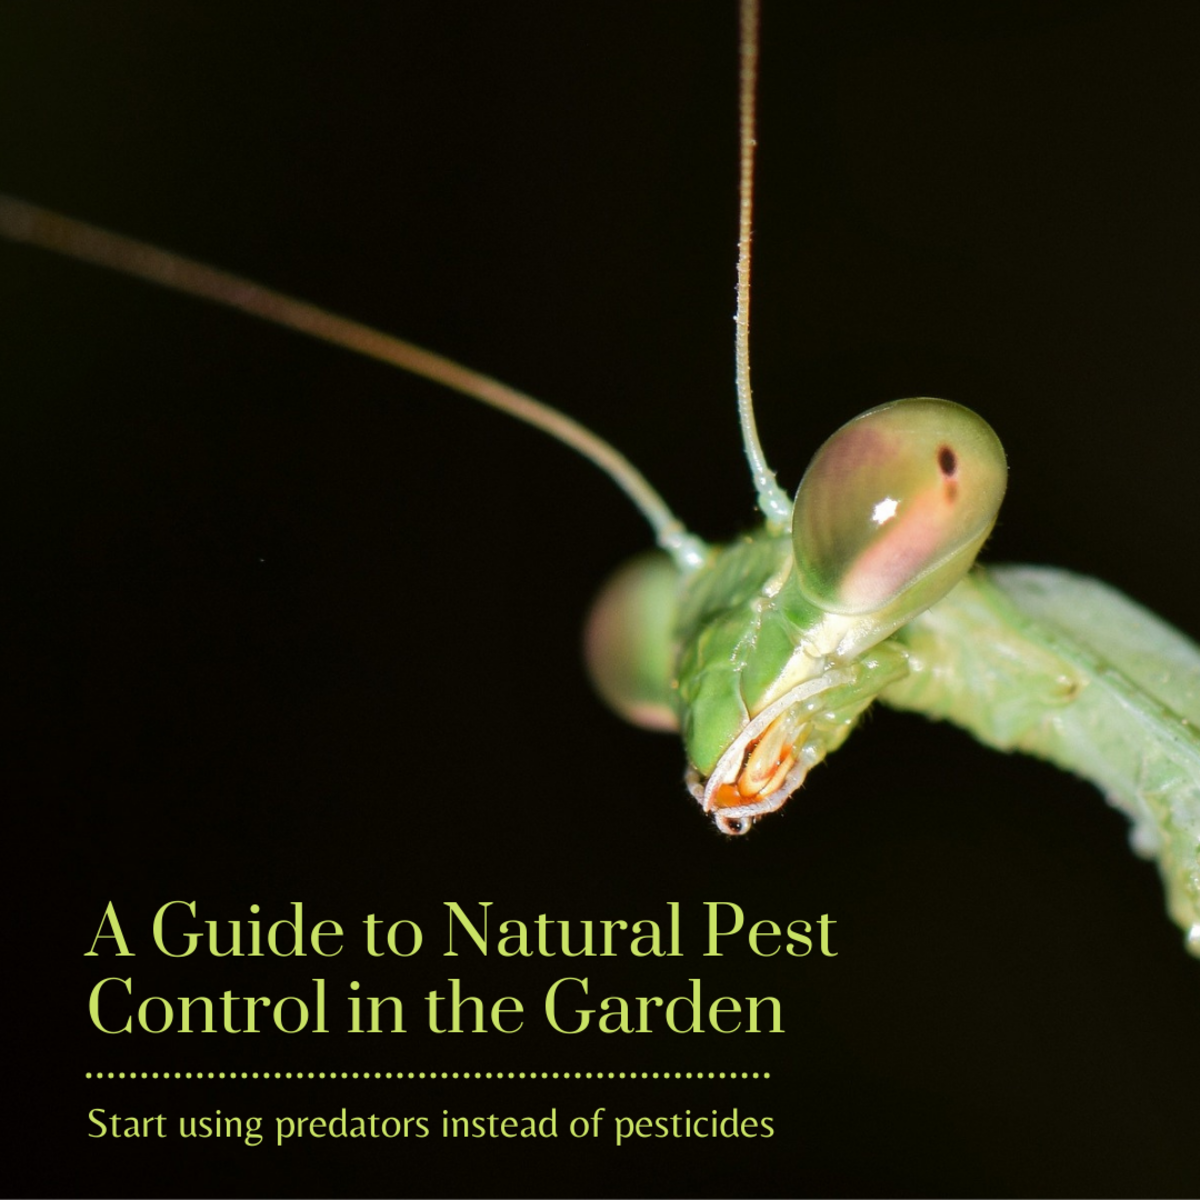 This guide will provide some options for you to take care of pests in your garden without resorting to harmful pesticides. 